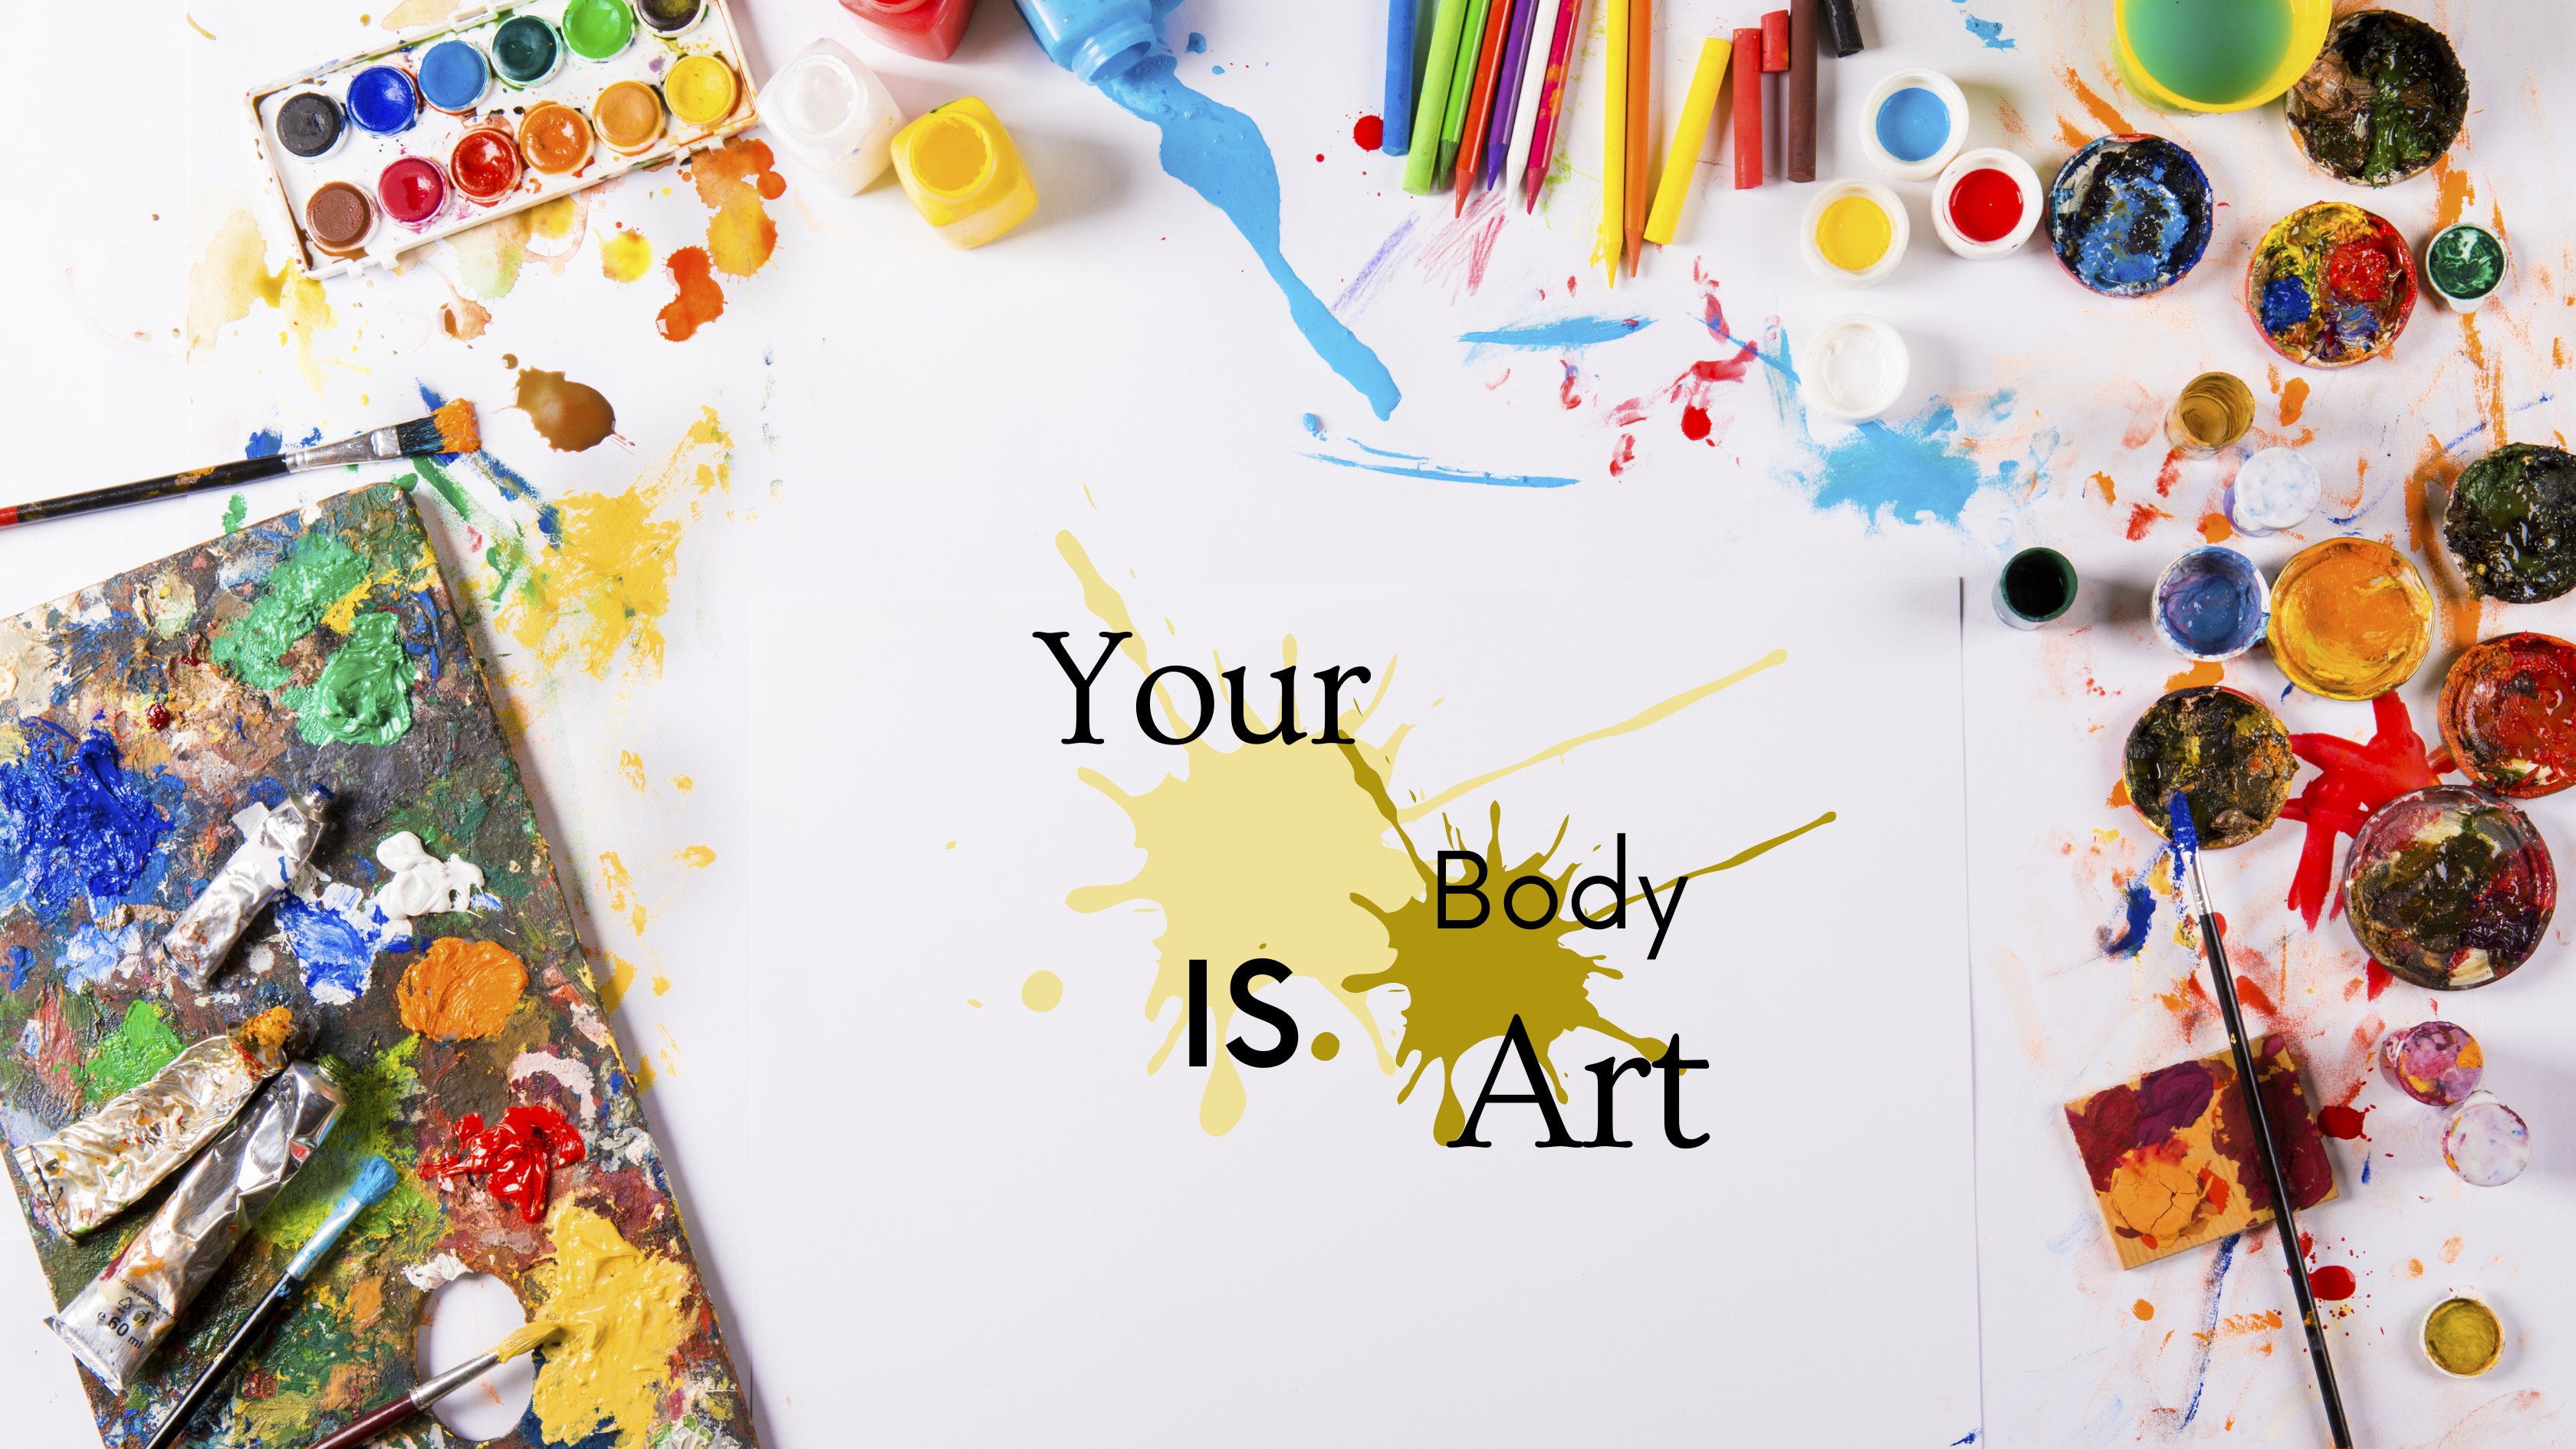 Your body is art